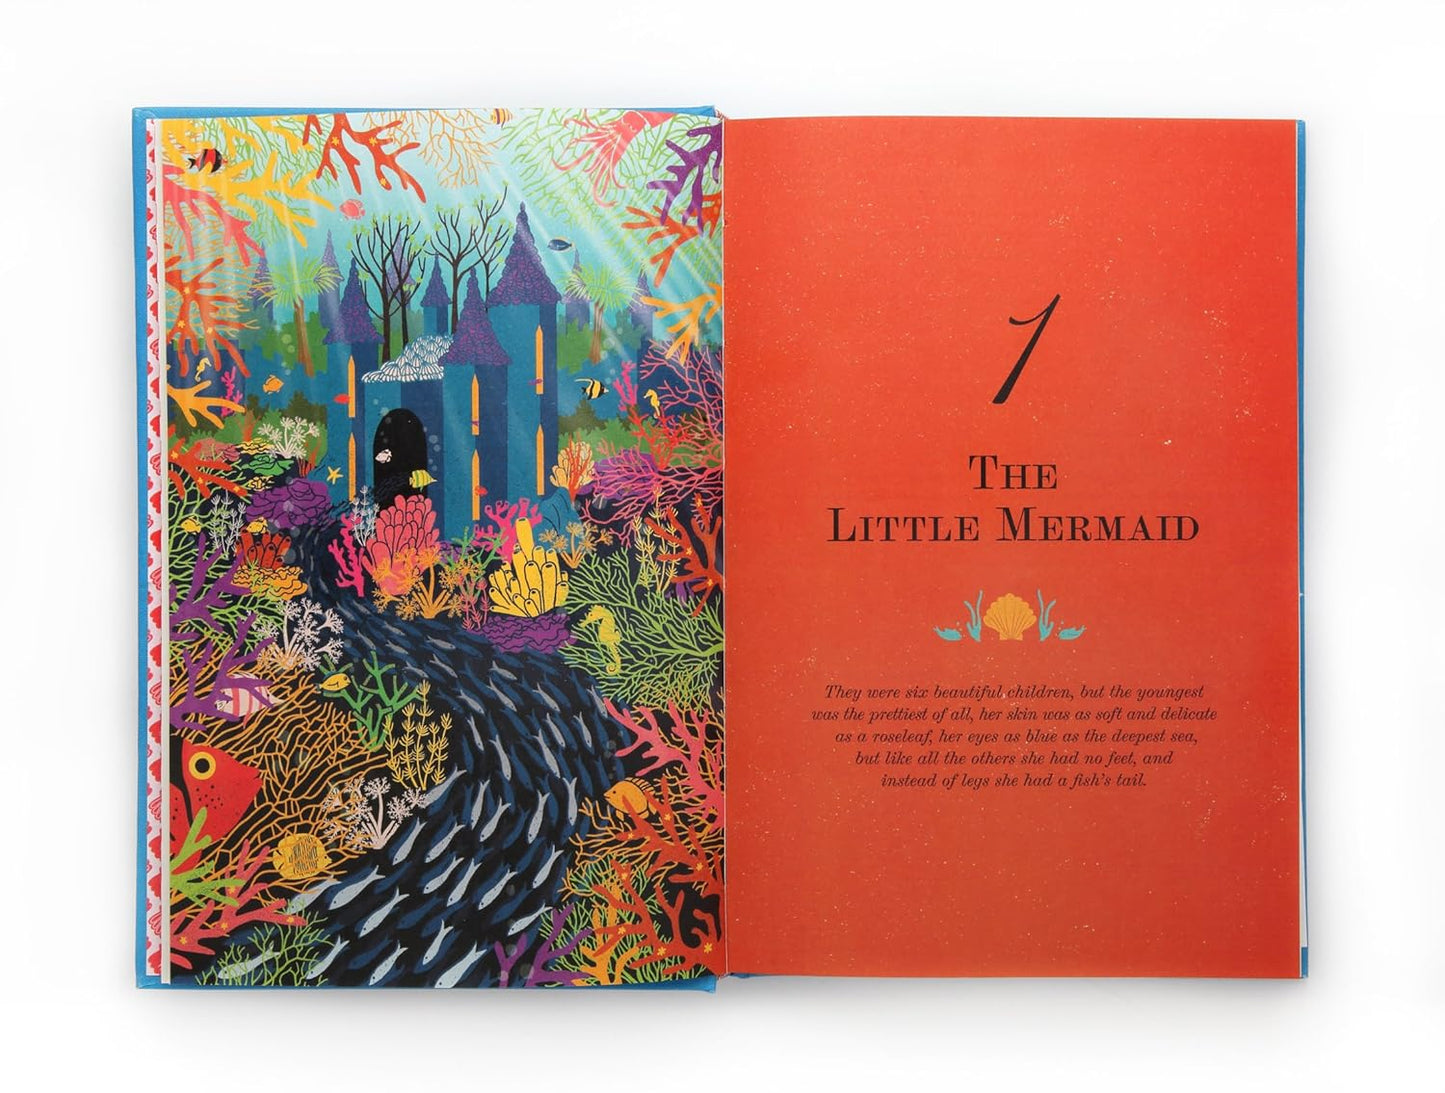 THE LITTLE MERMAID AND OTHER TALES BY HANS CHRISTIAN ANDERSON